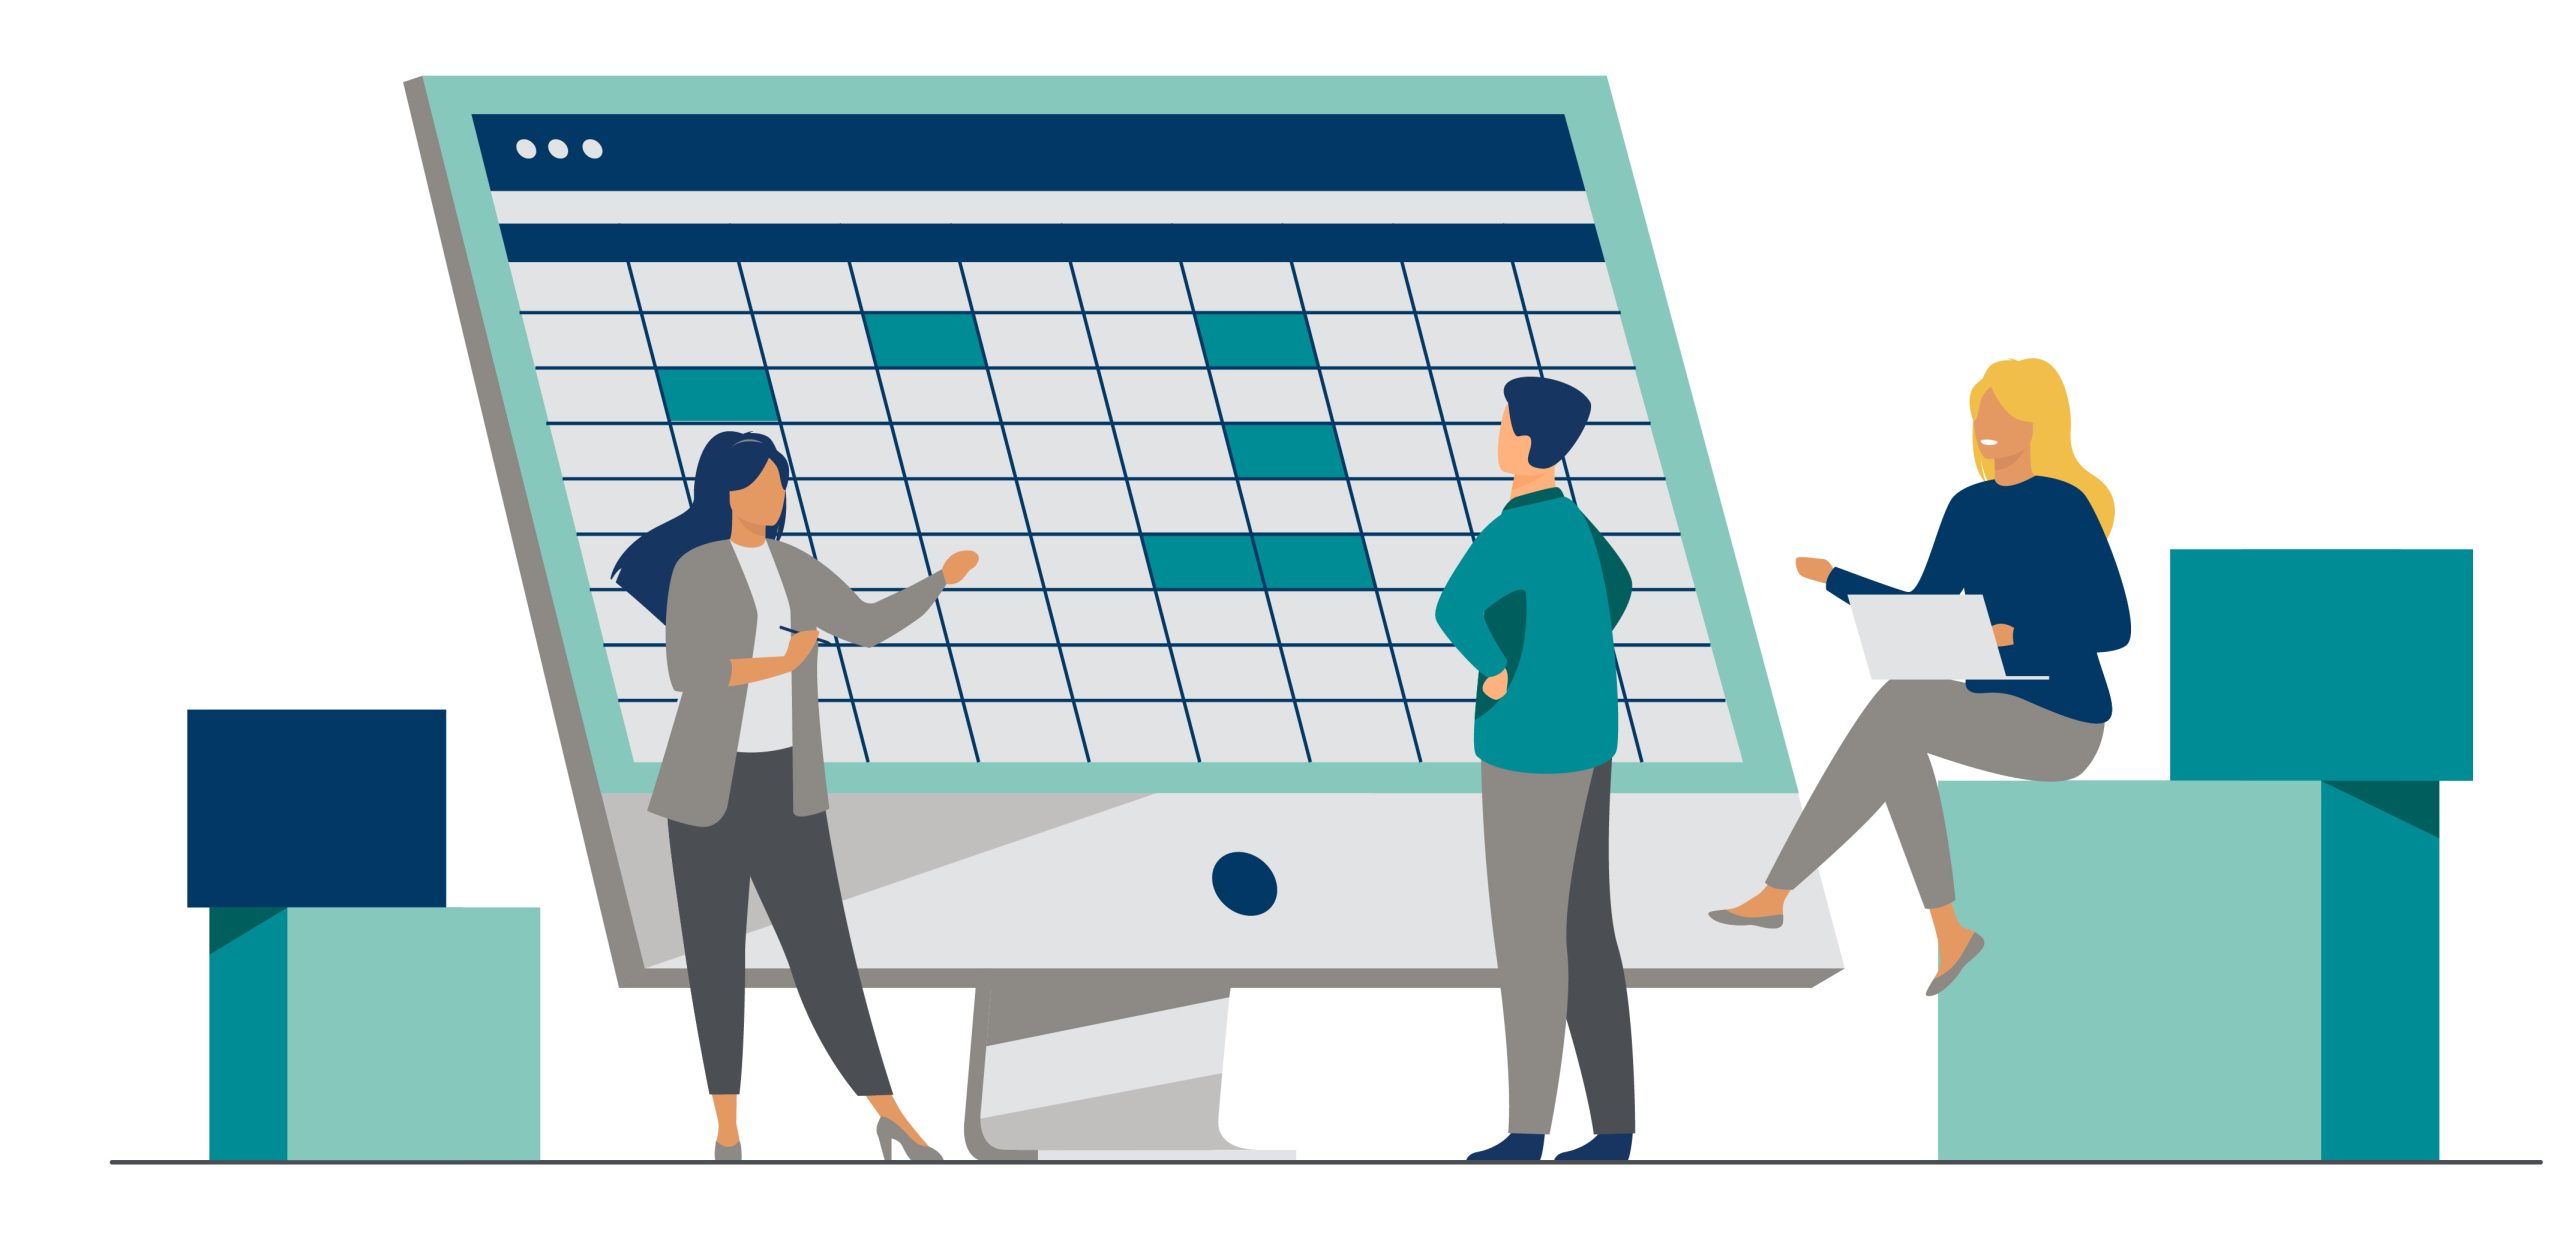 The Controller’s Guide to Vendor Statement Reconciliation | Spreadsheets | Three illustrated individuals gather around a computer that displays spreadsheets